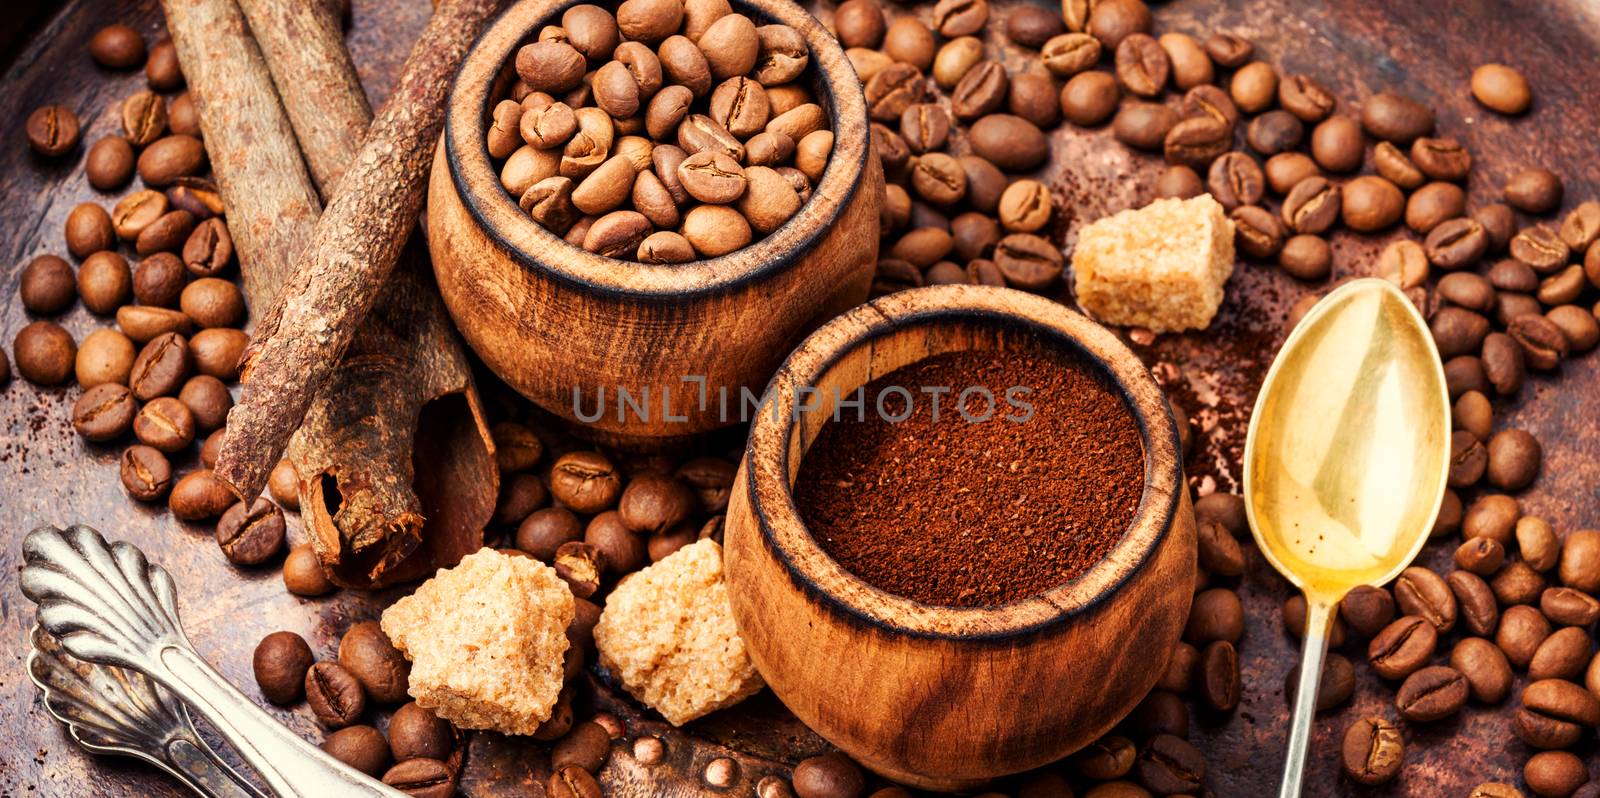 Coffee beans and grounds by LMykola